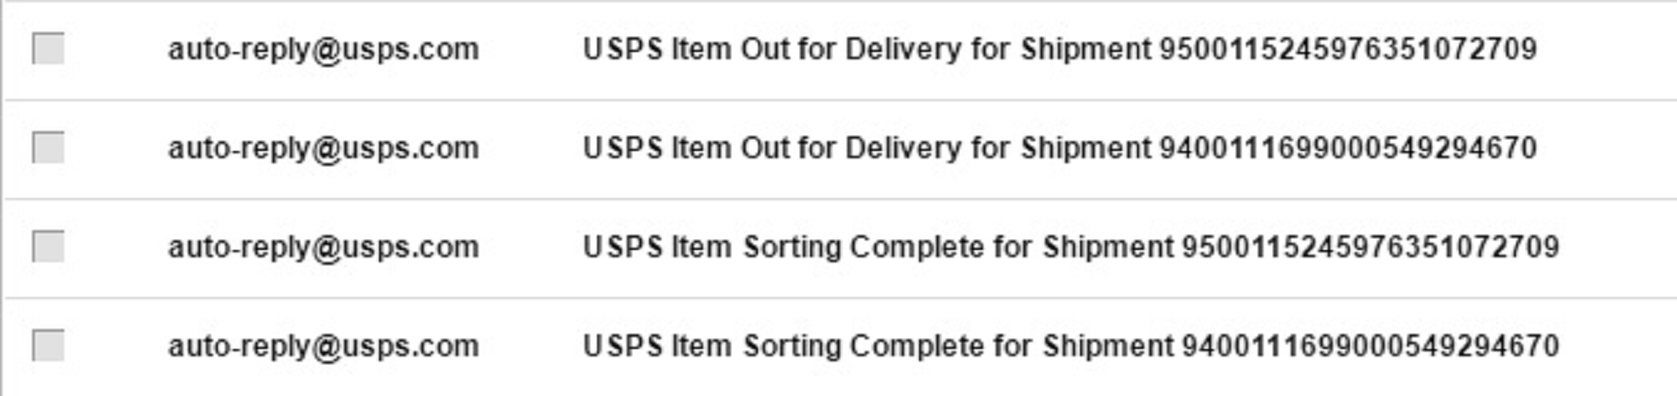 Screen Cap of emails I recieved from USPS